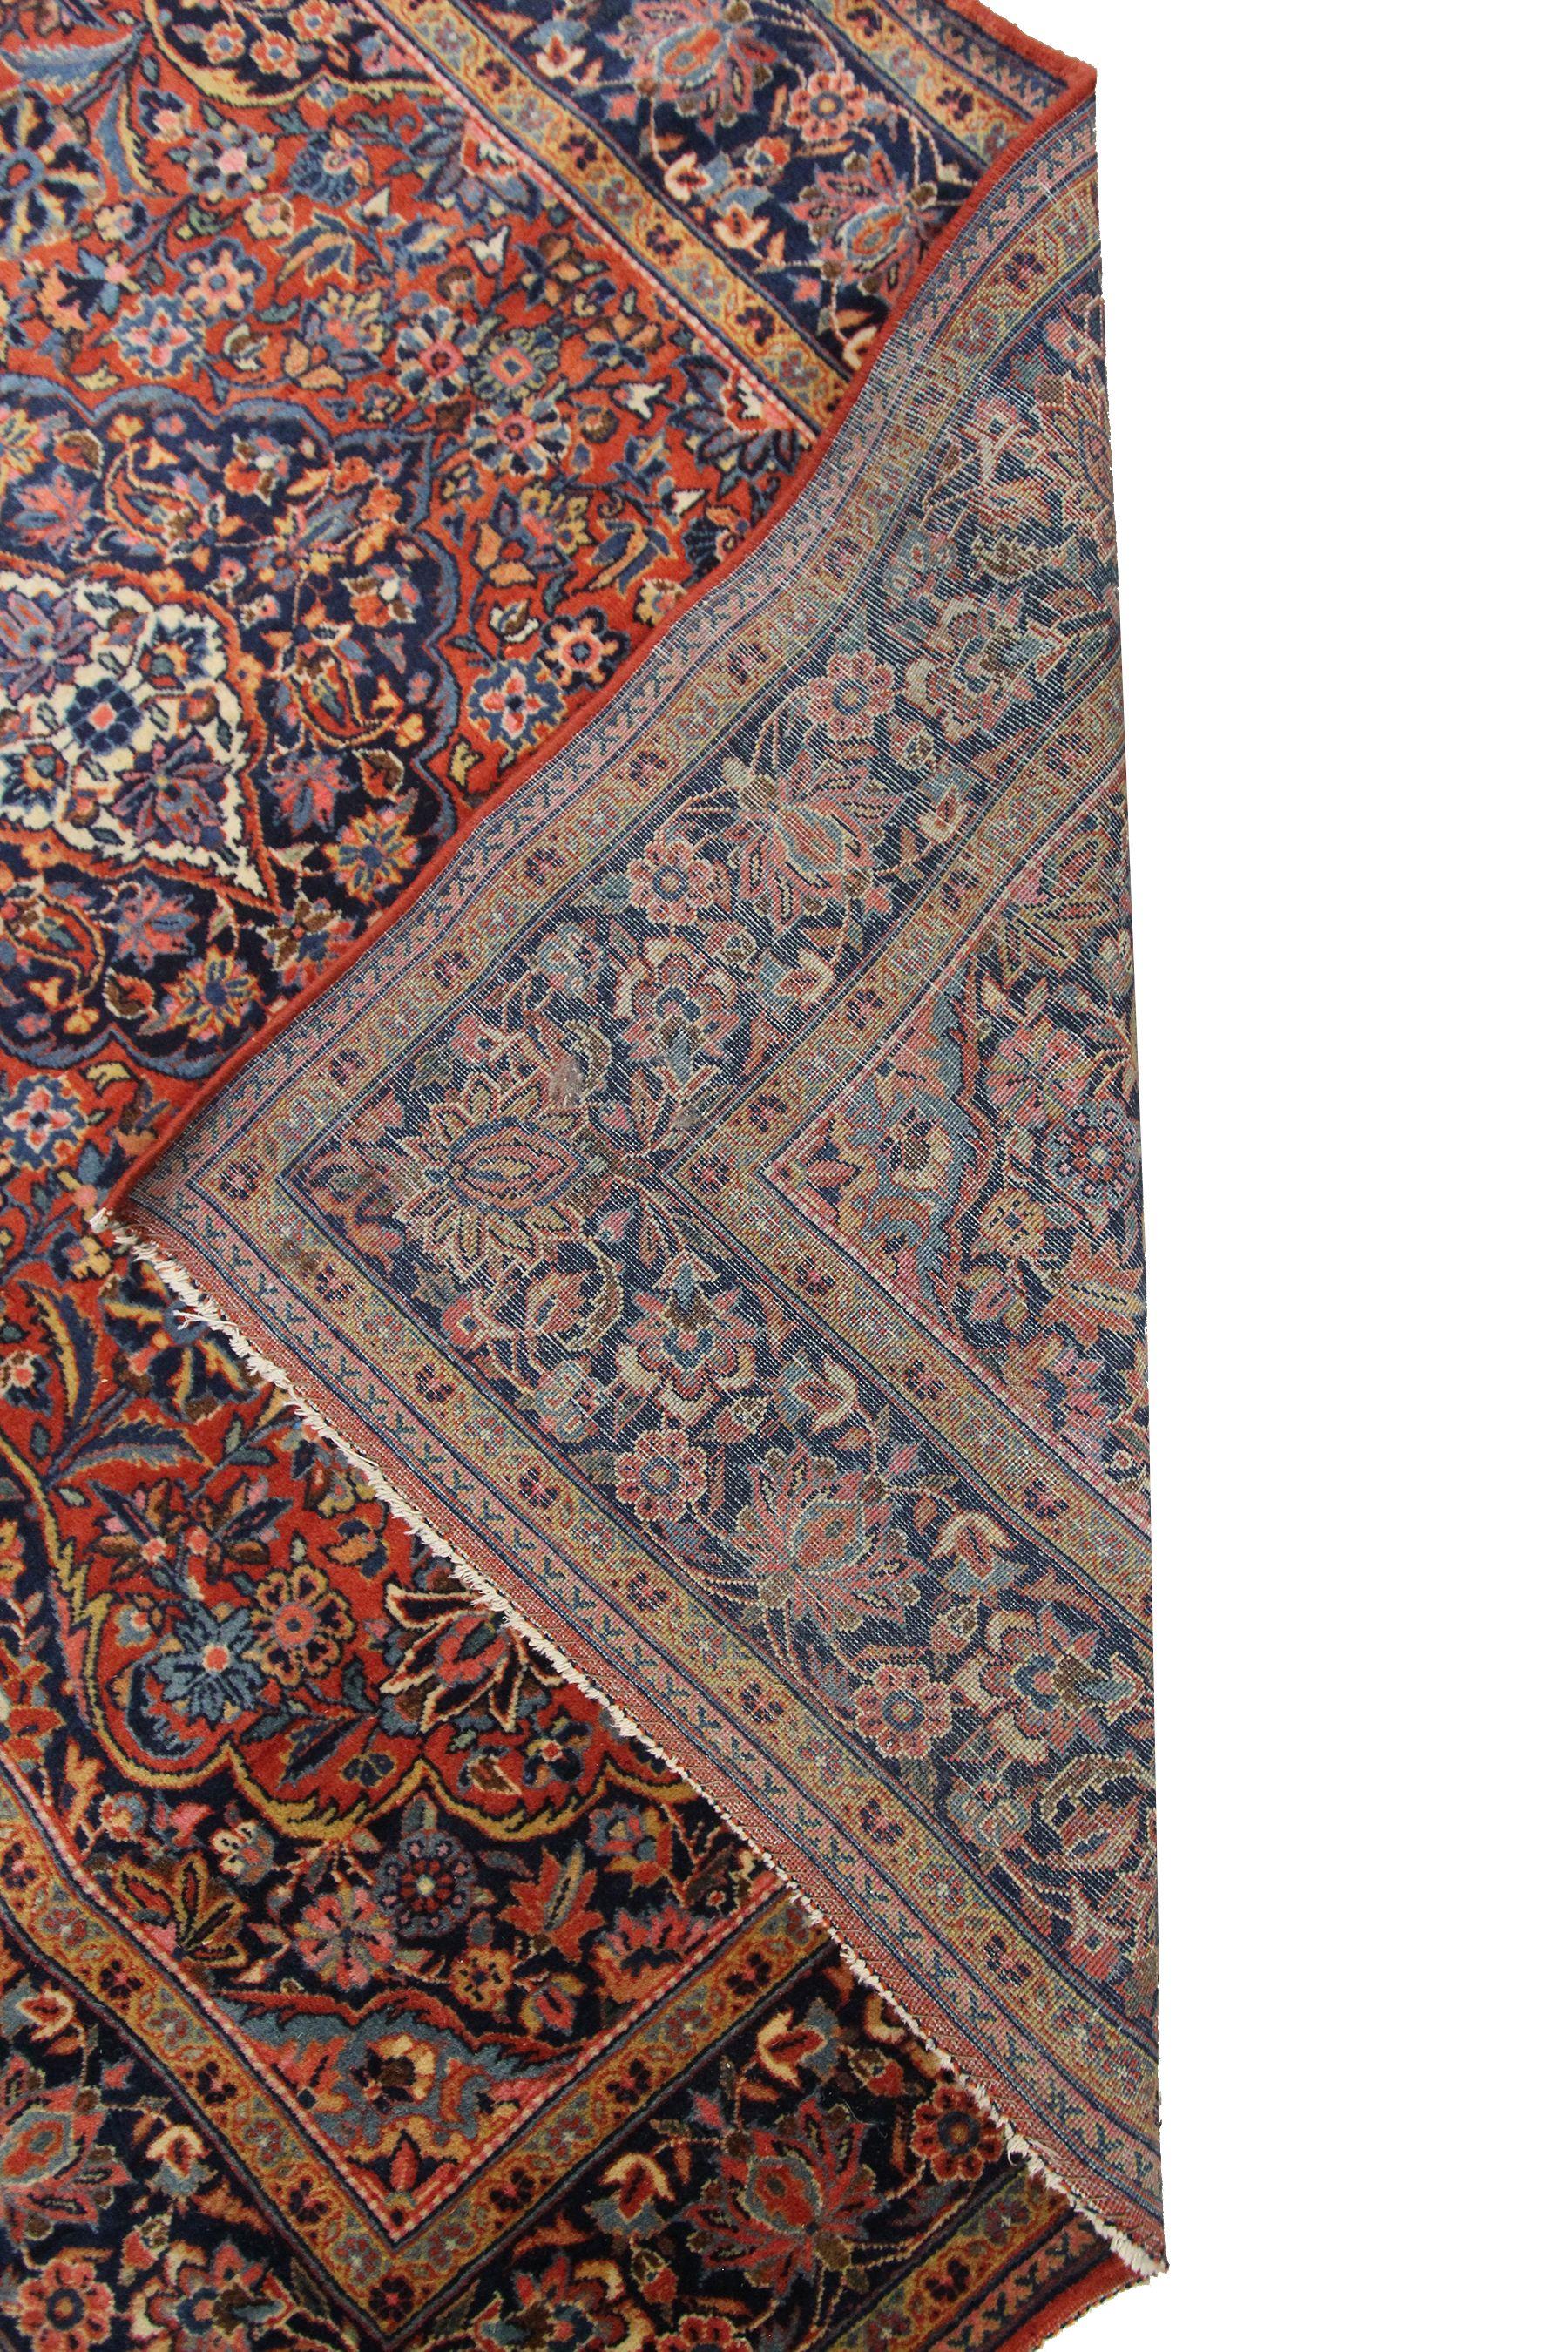 Antique Dabir Kashan Rug Persian Rug Kork Wool 1900 In Good Condition For Sale In New York, NY